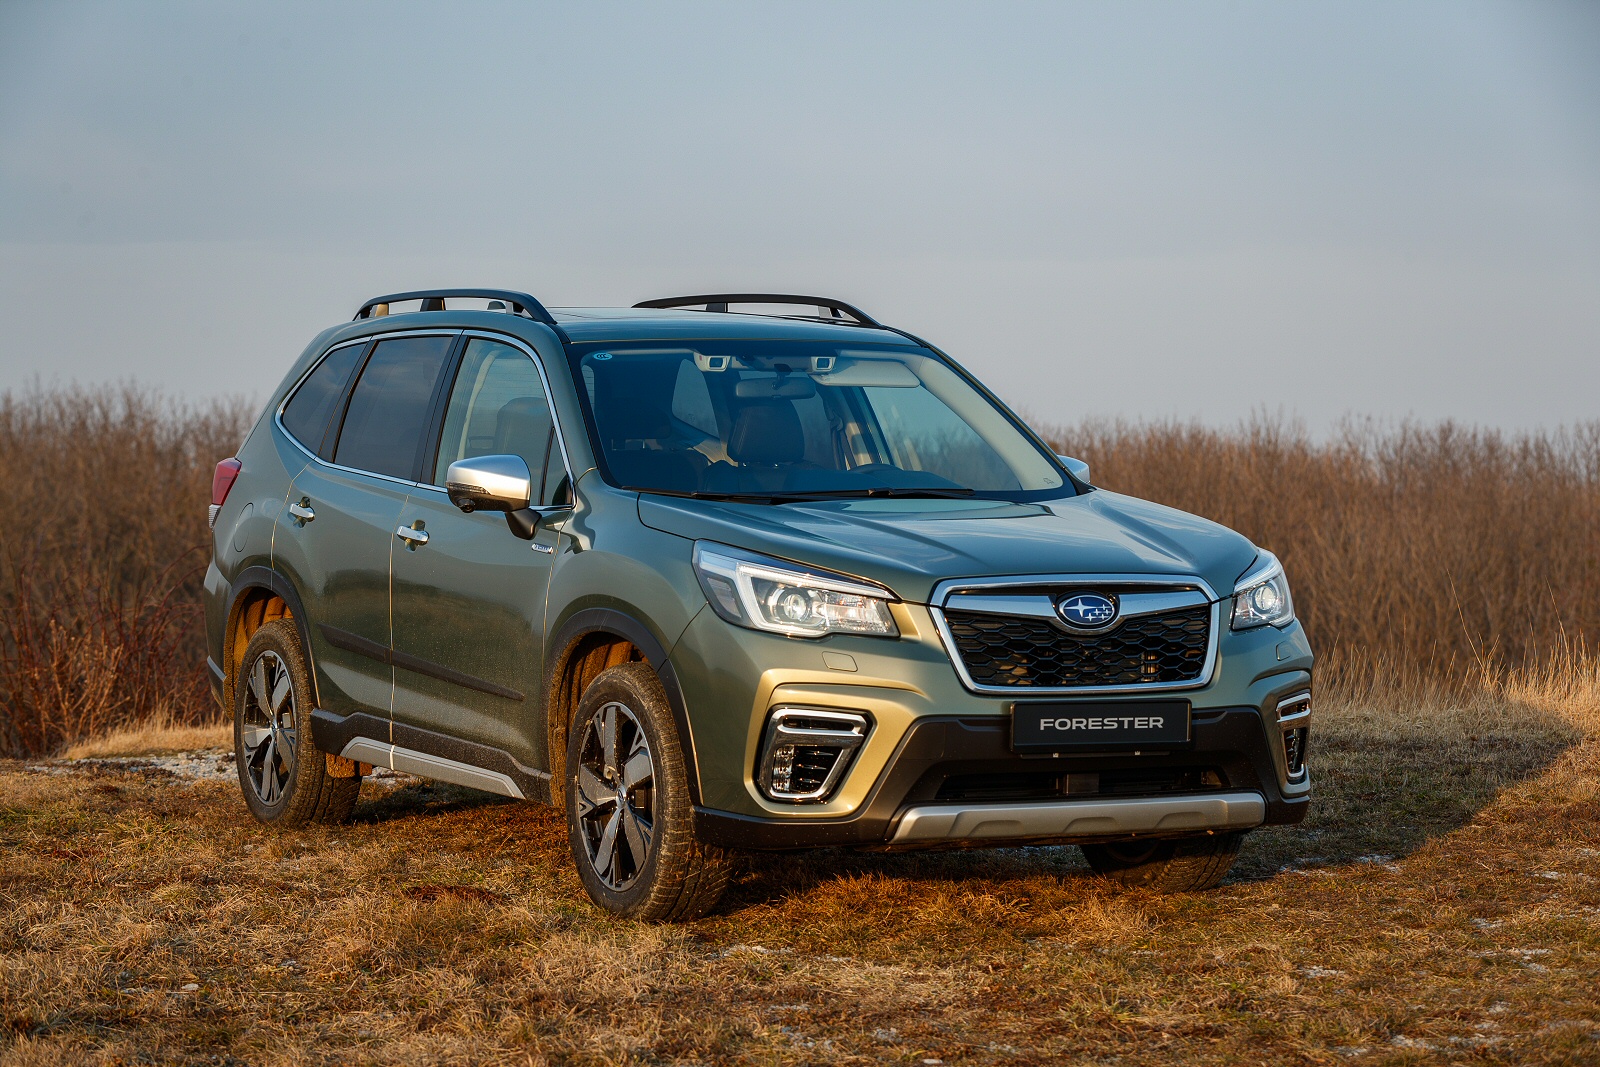 SUBARU FORESTER ESTATE 2.0i eBoxer XE 5dr Lineartronic